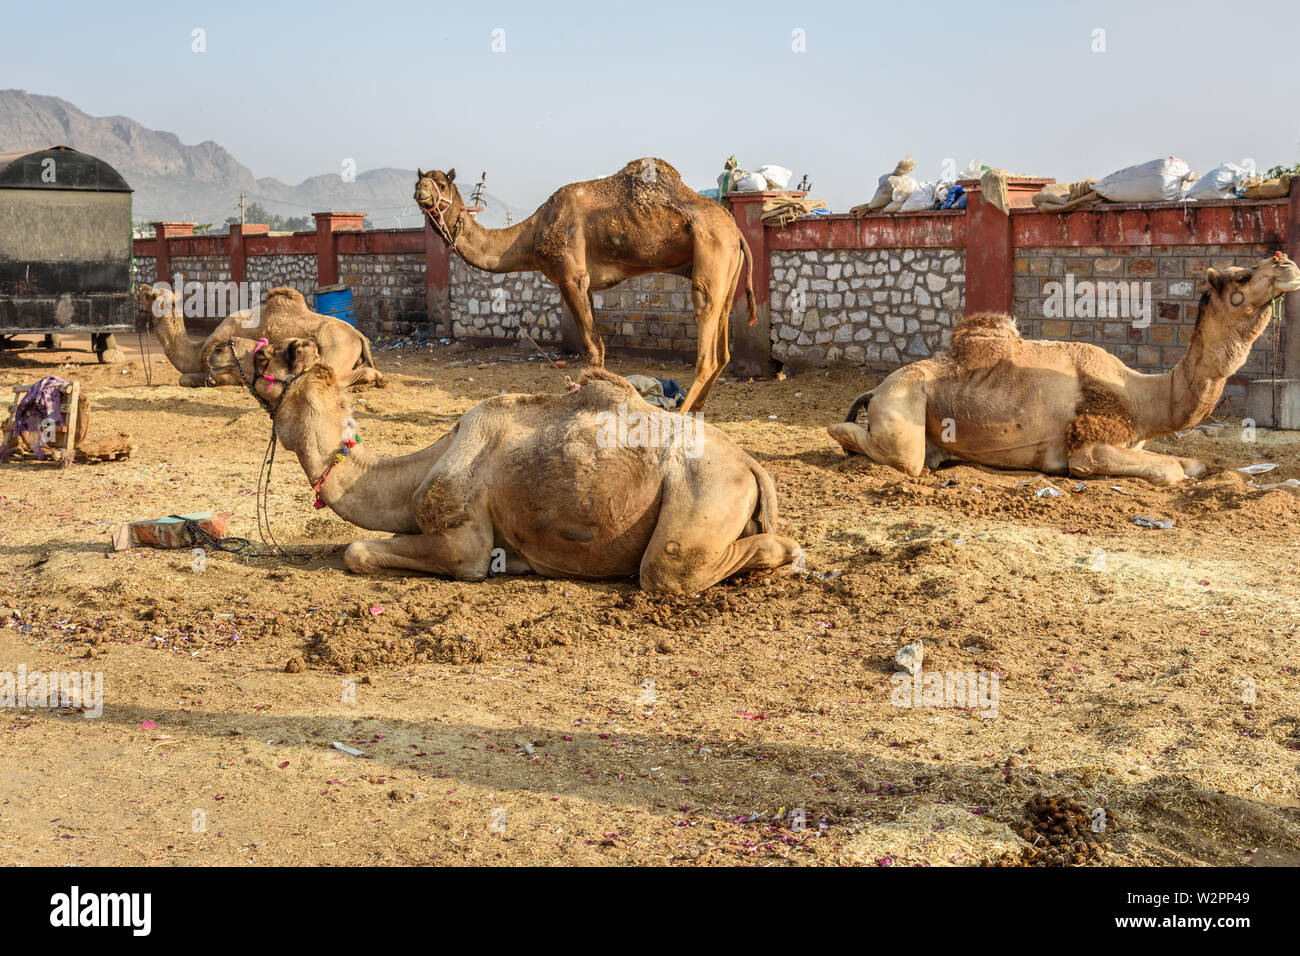 Camels on the street in Ajmer. Rajasthan. India Stock Photo